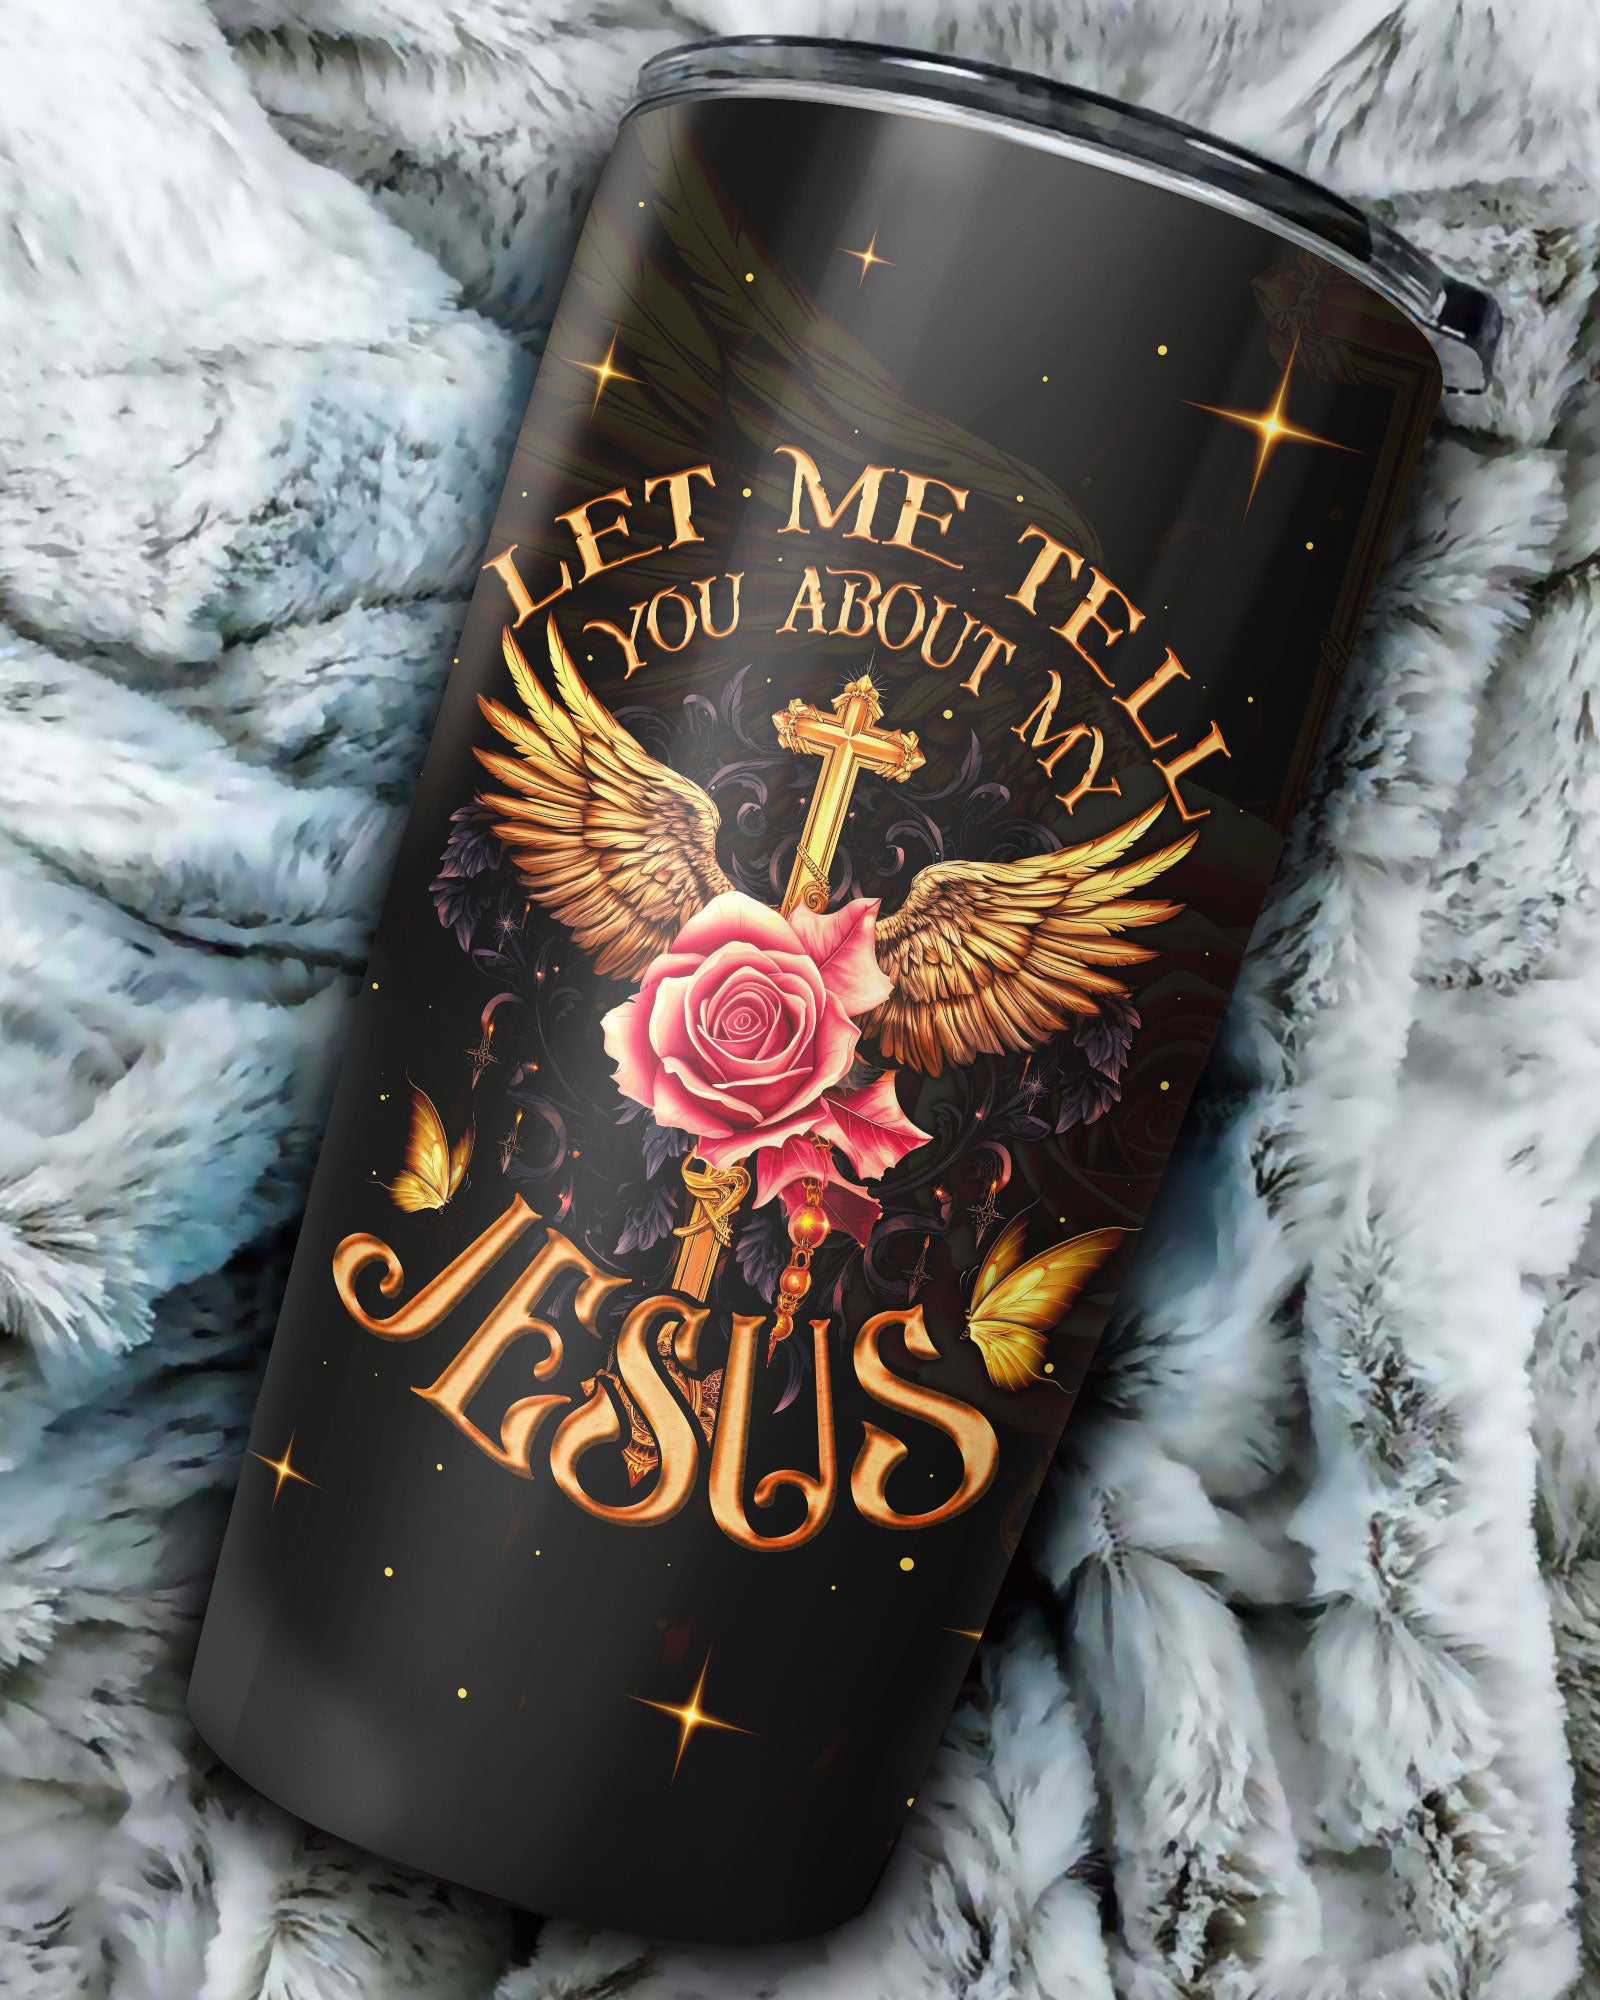 Let Me Tell You About My Jesus Tumbler - Ty3006235